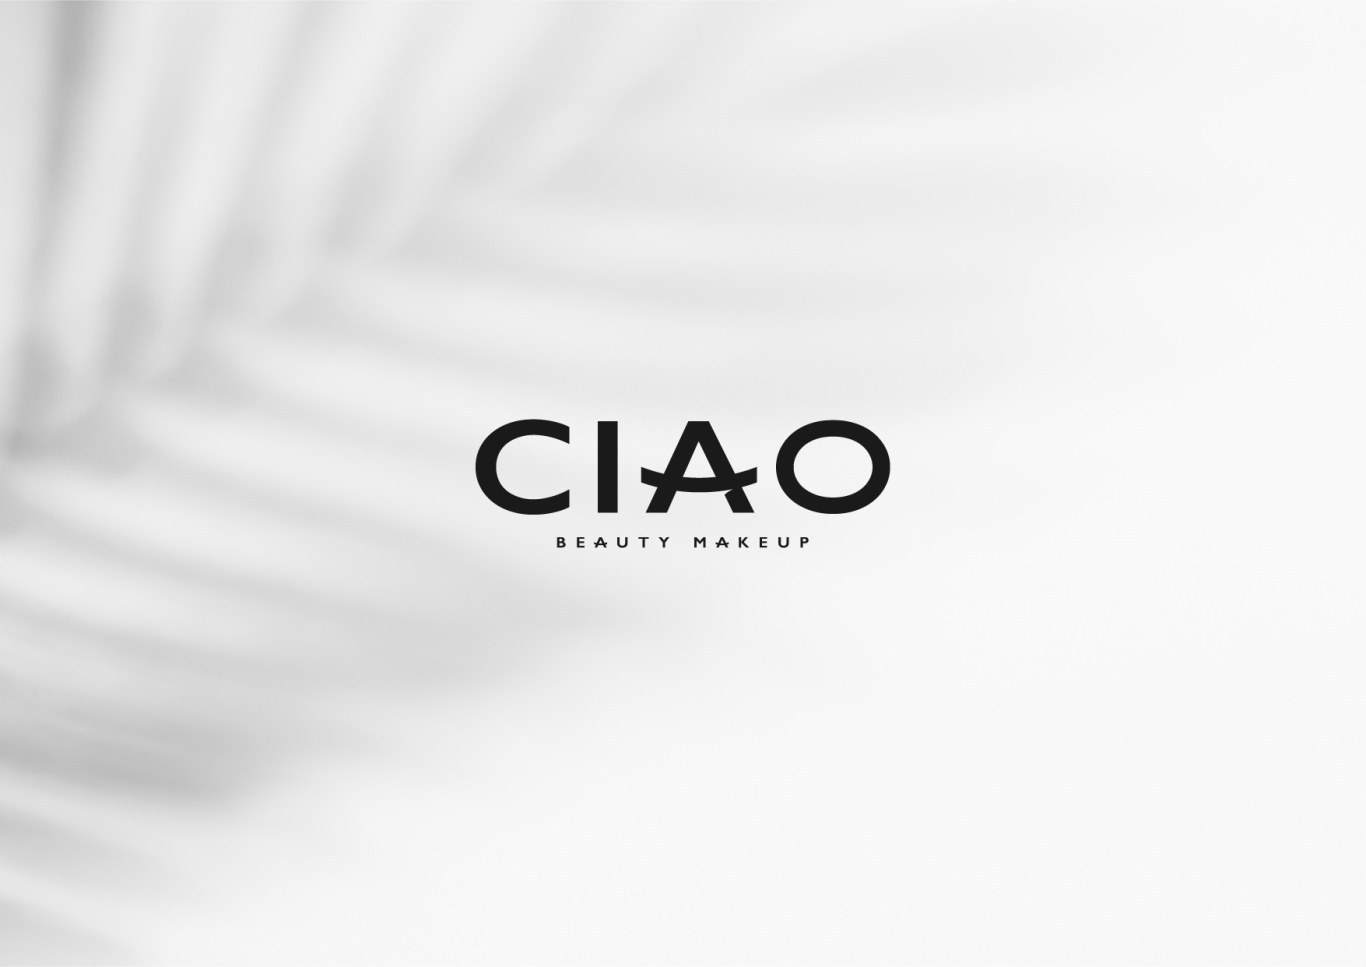 Ciao美妆logo设计图0